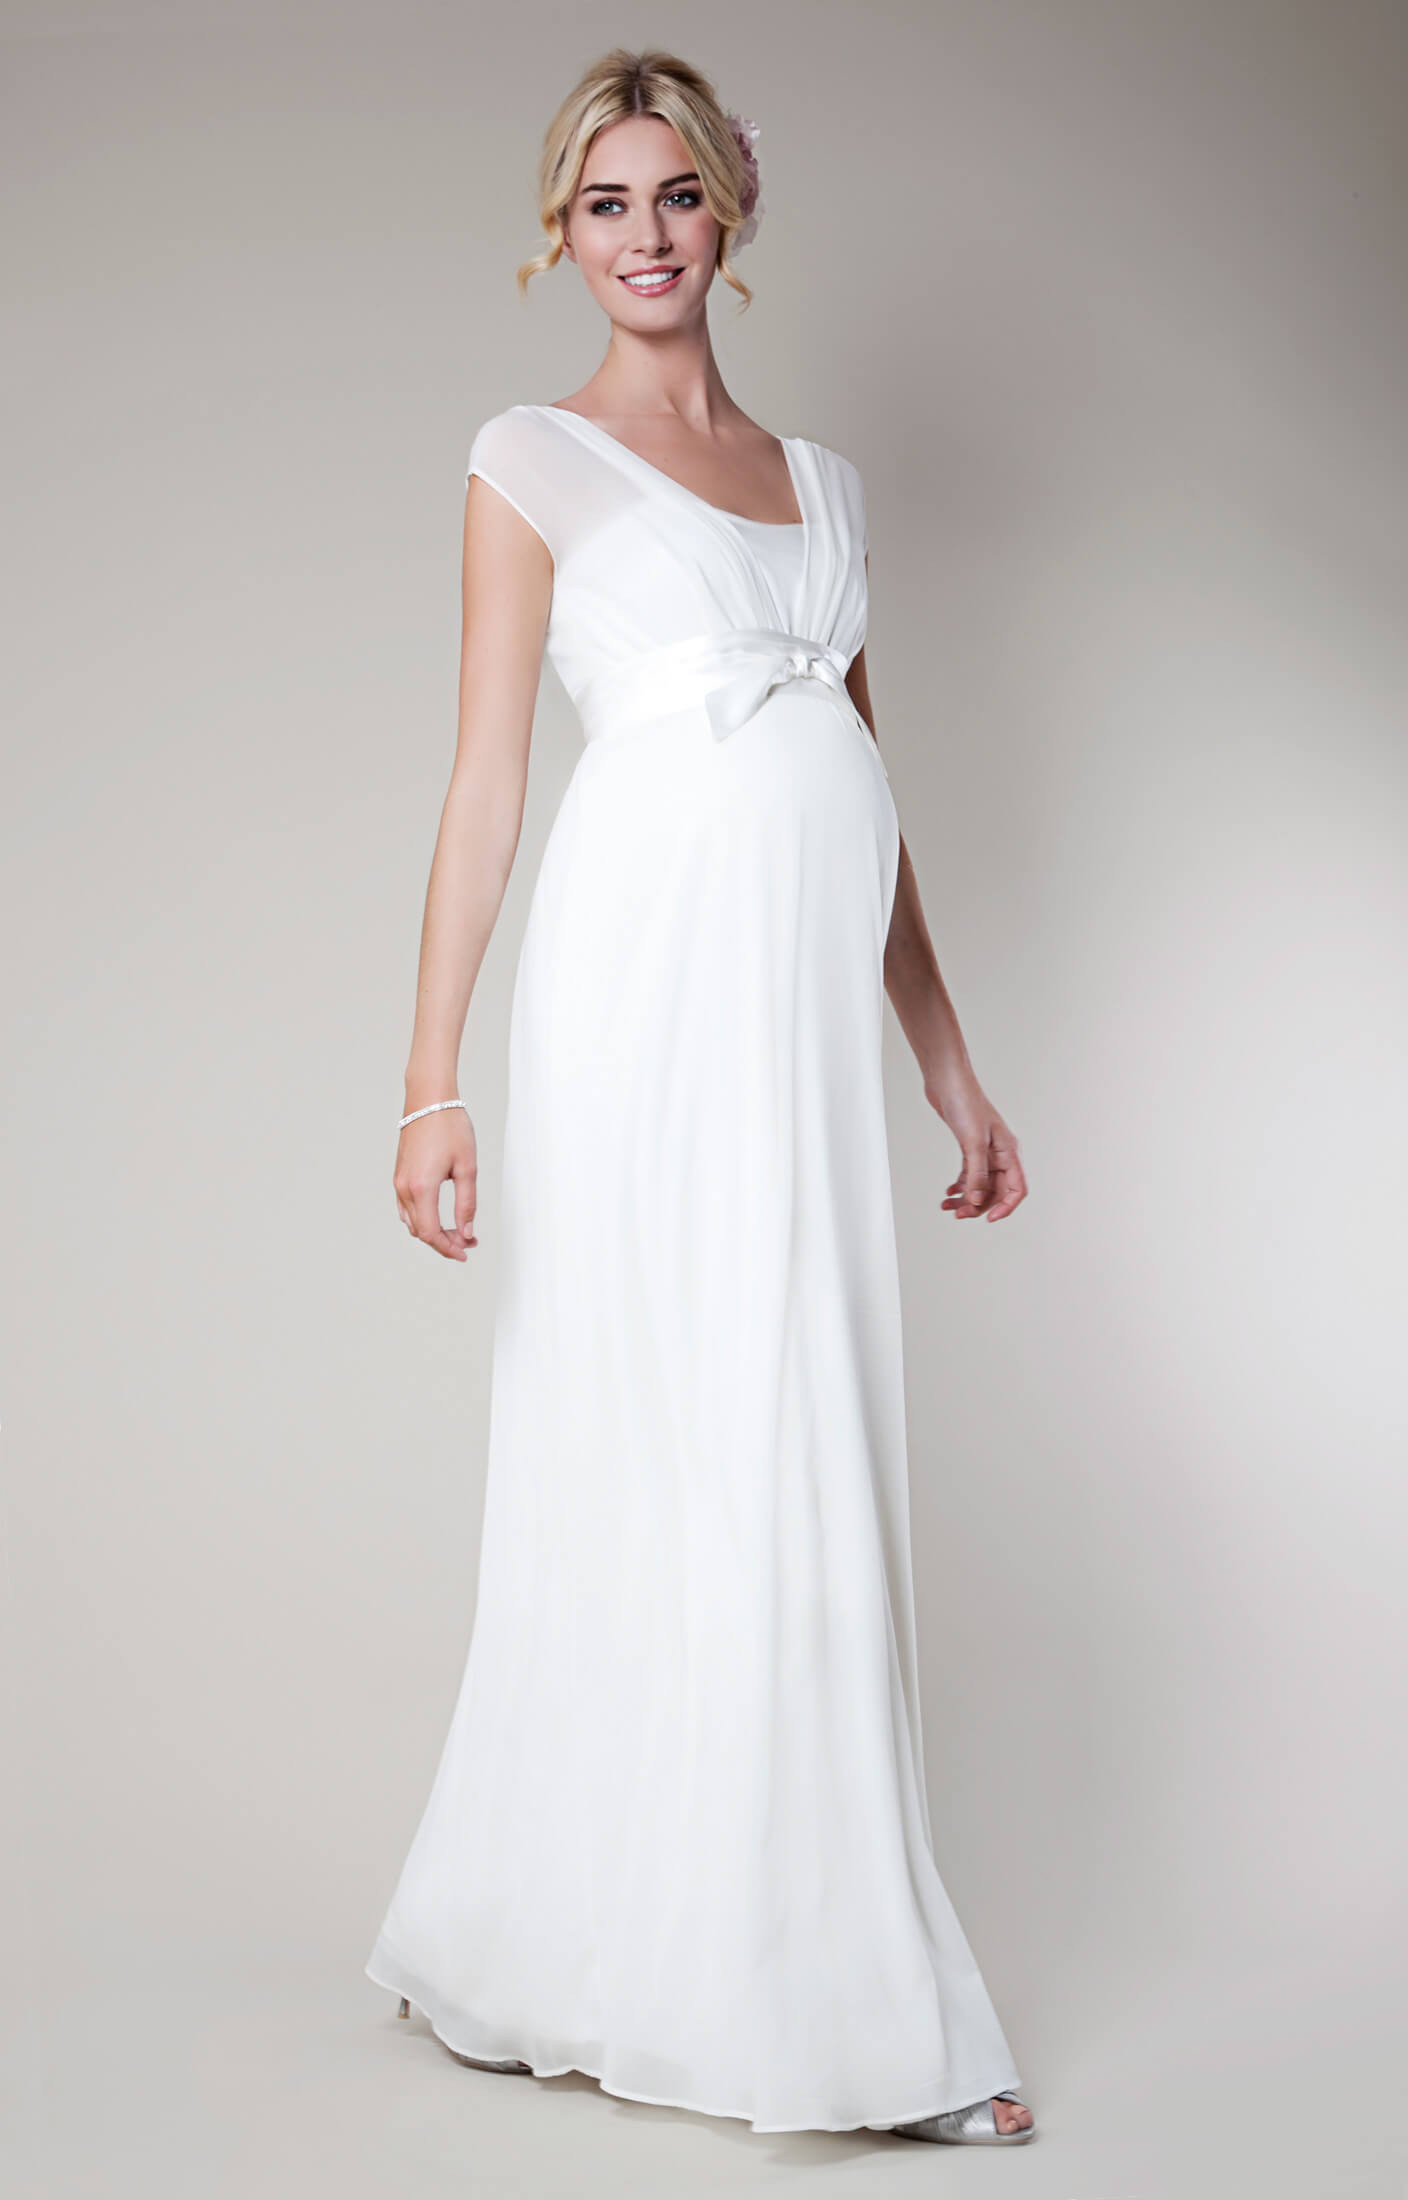 Maternity Wedding Gowns
 Lily Silk Maternity Wedding Gown Long Ivory Maternity